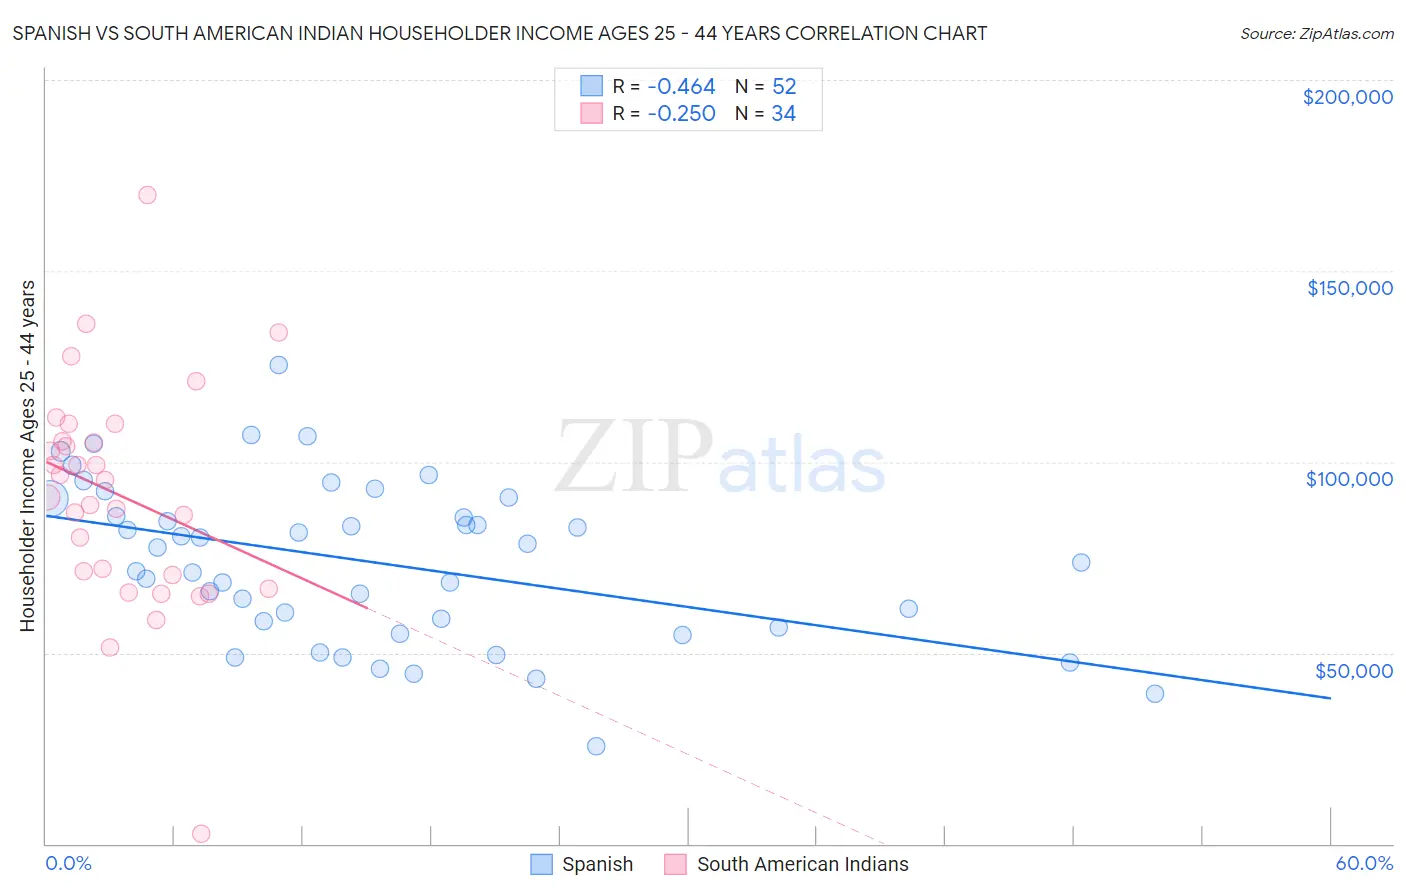 Spanish vs South American Indian Householder Income Ages 25 - 44 years